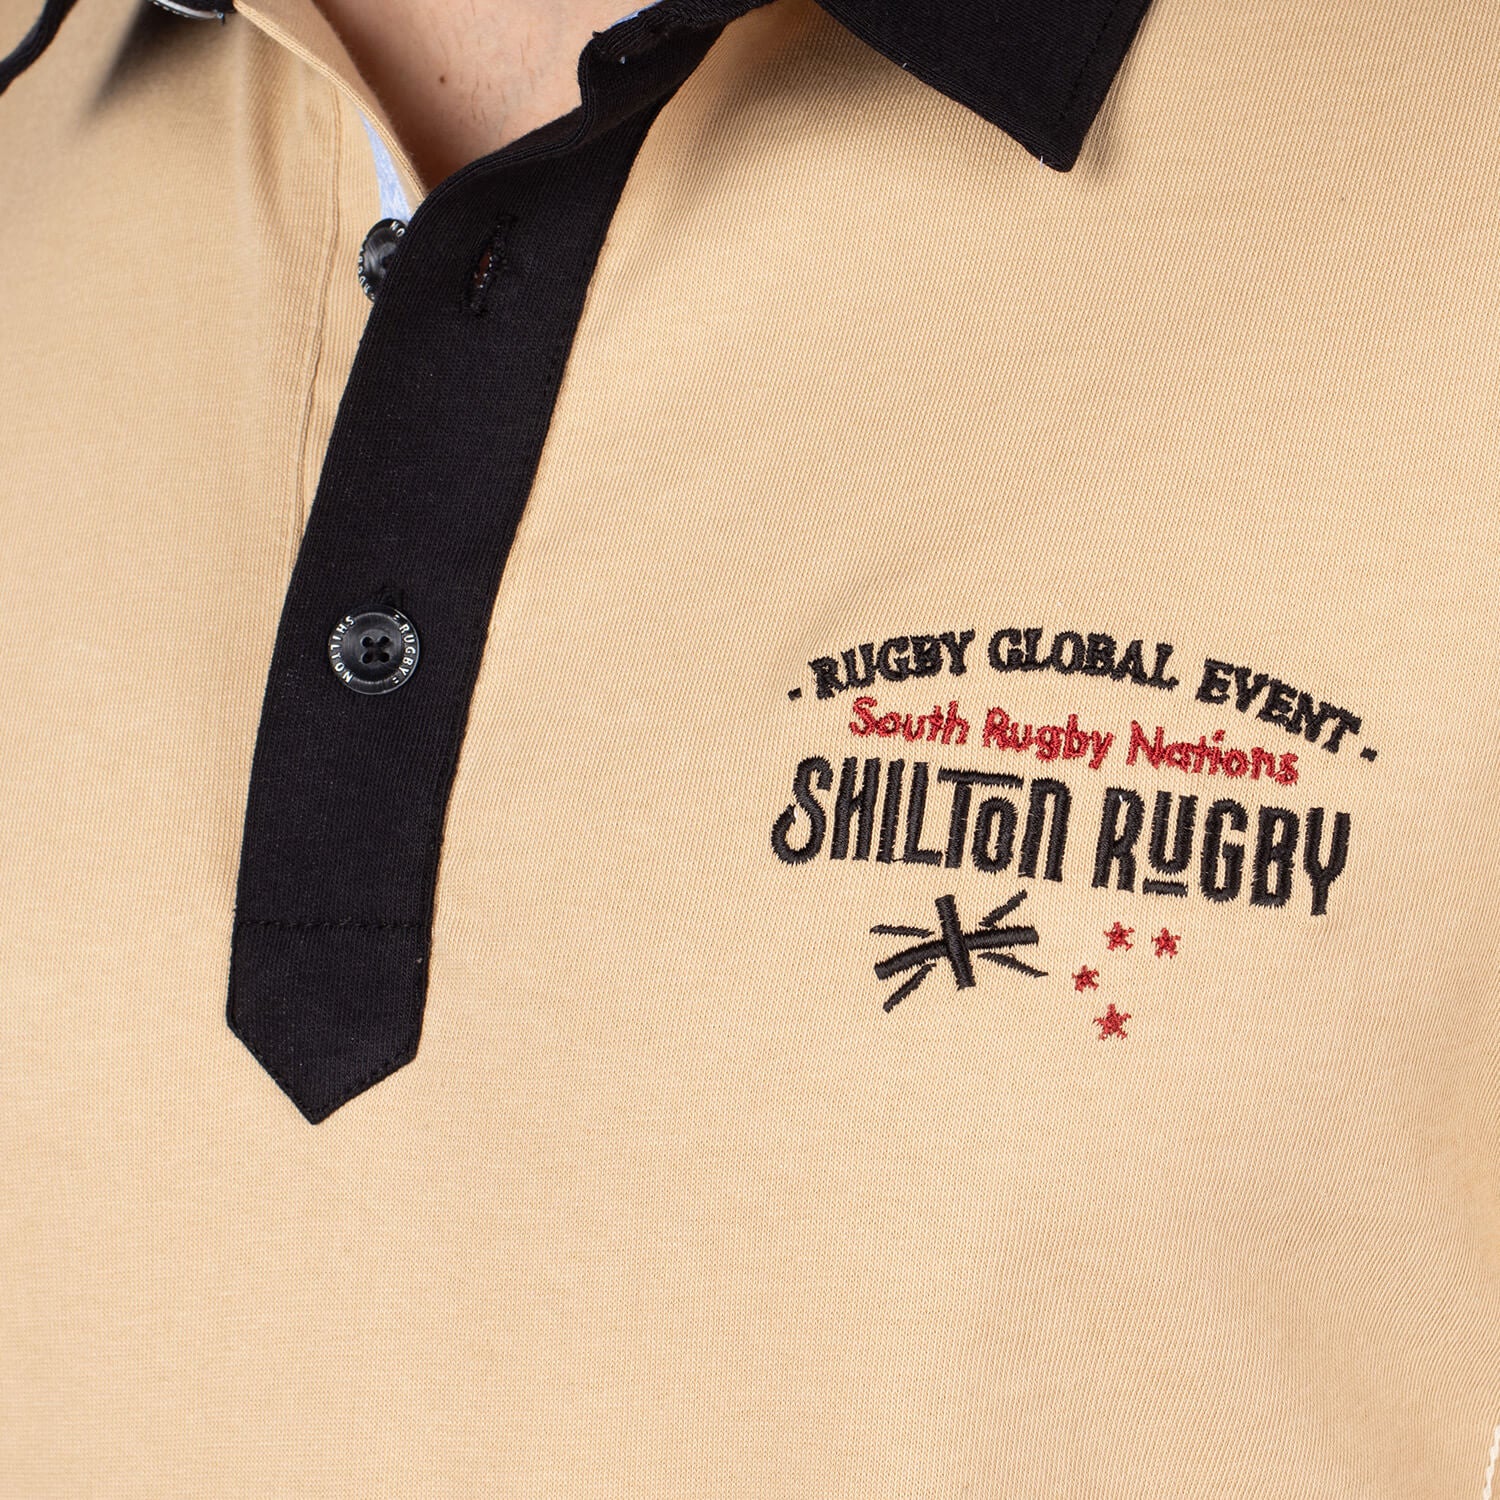 Polo south rugby nations